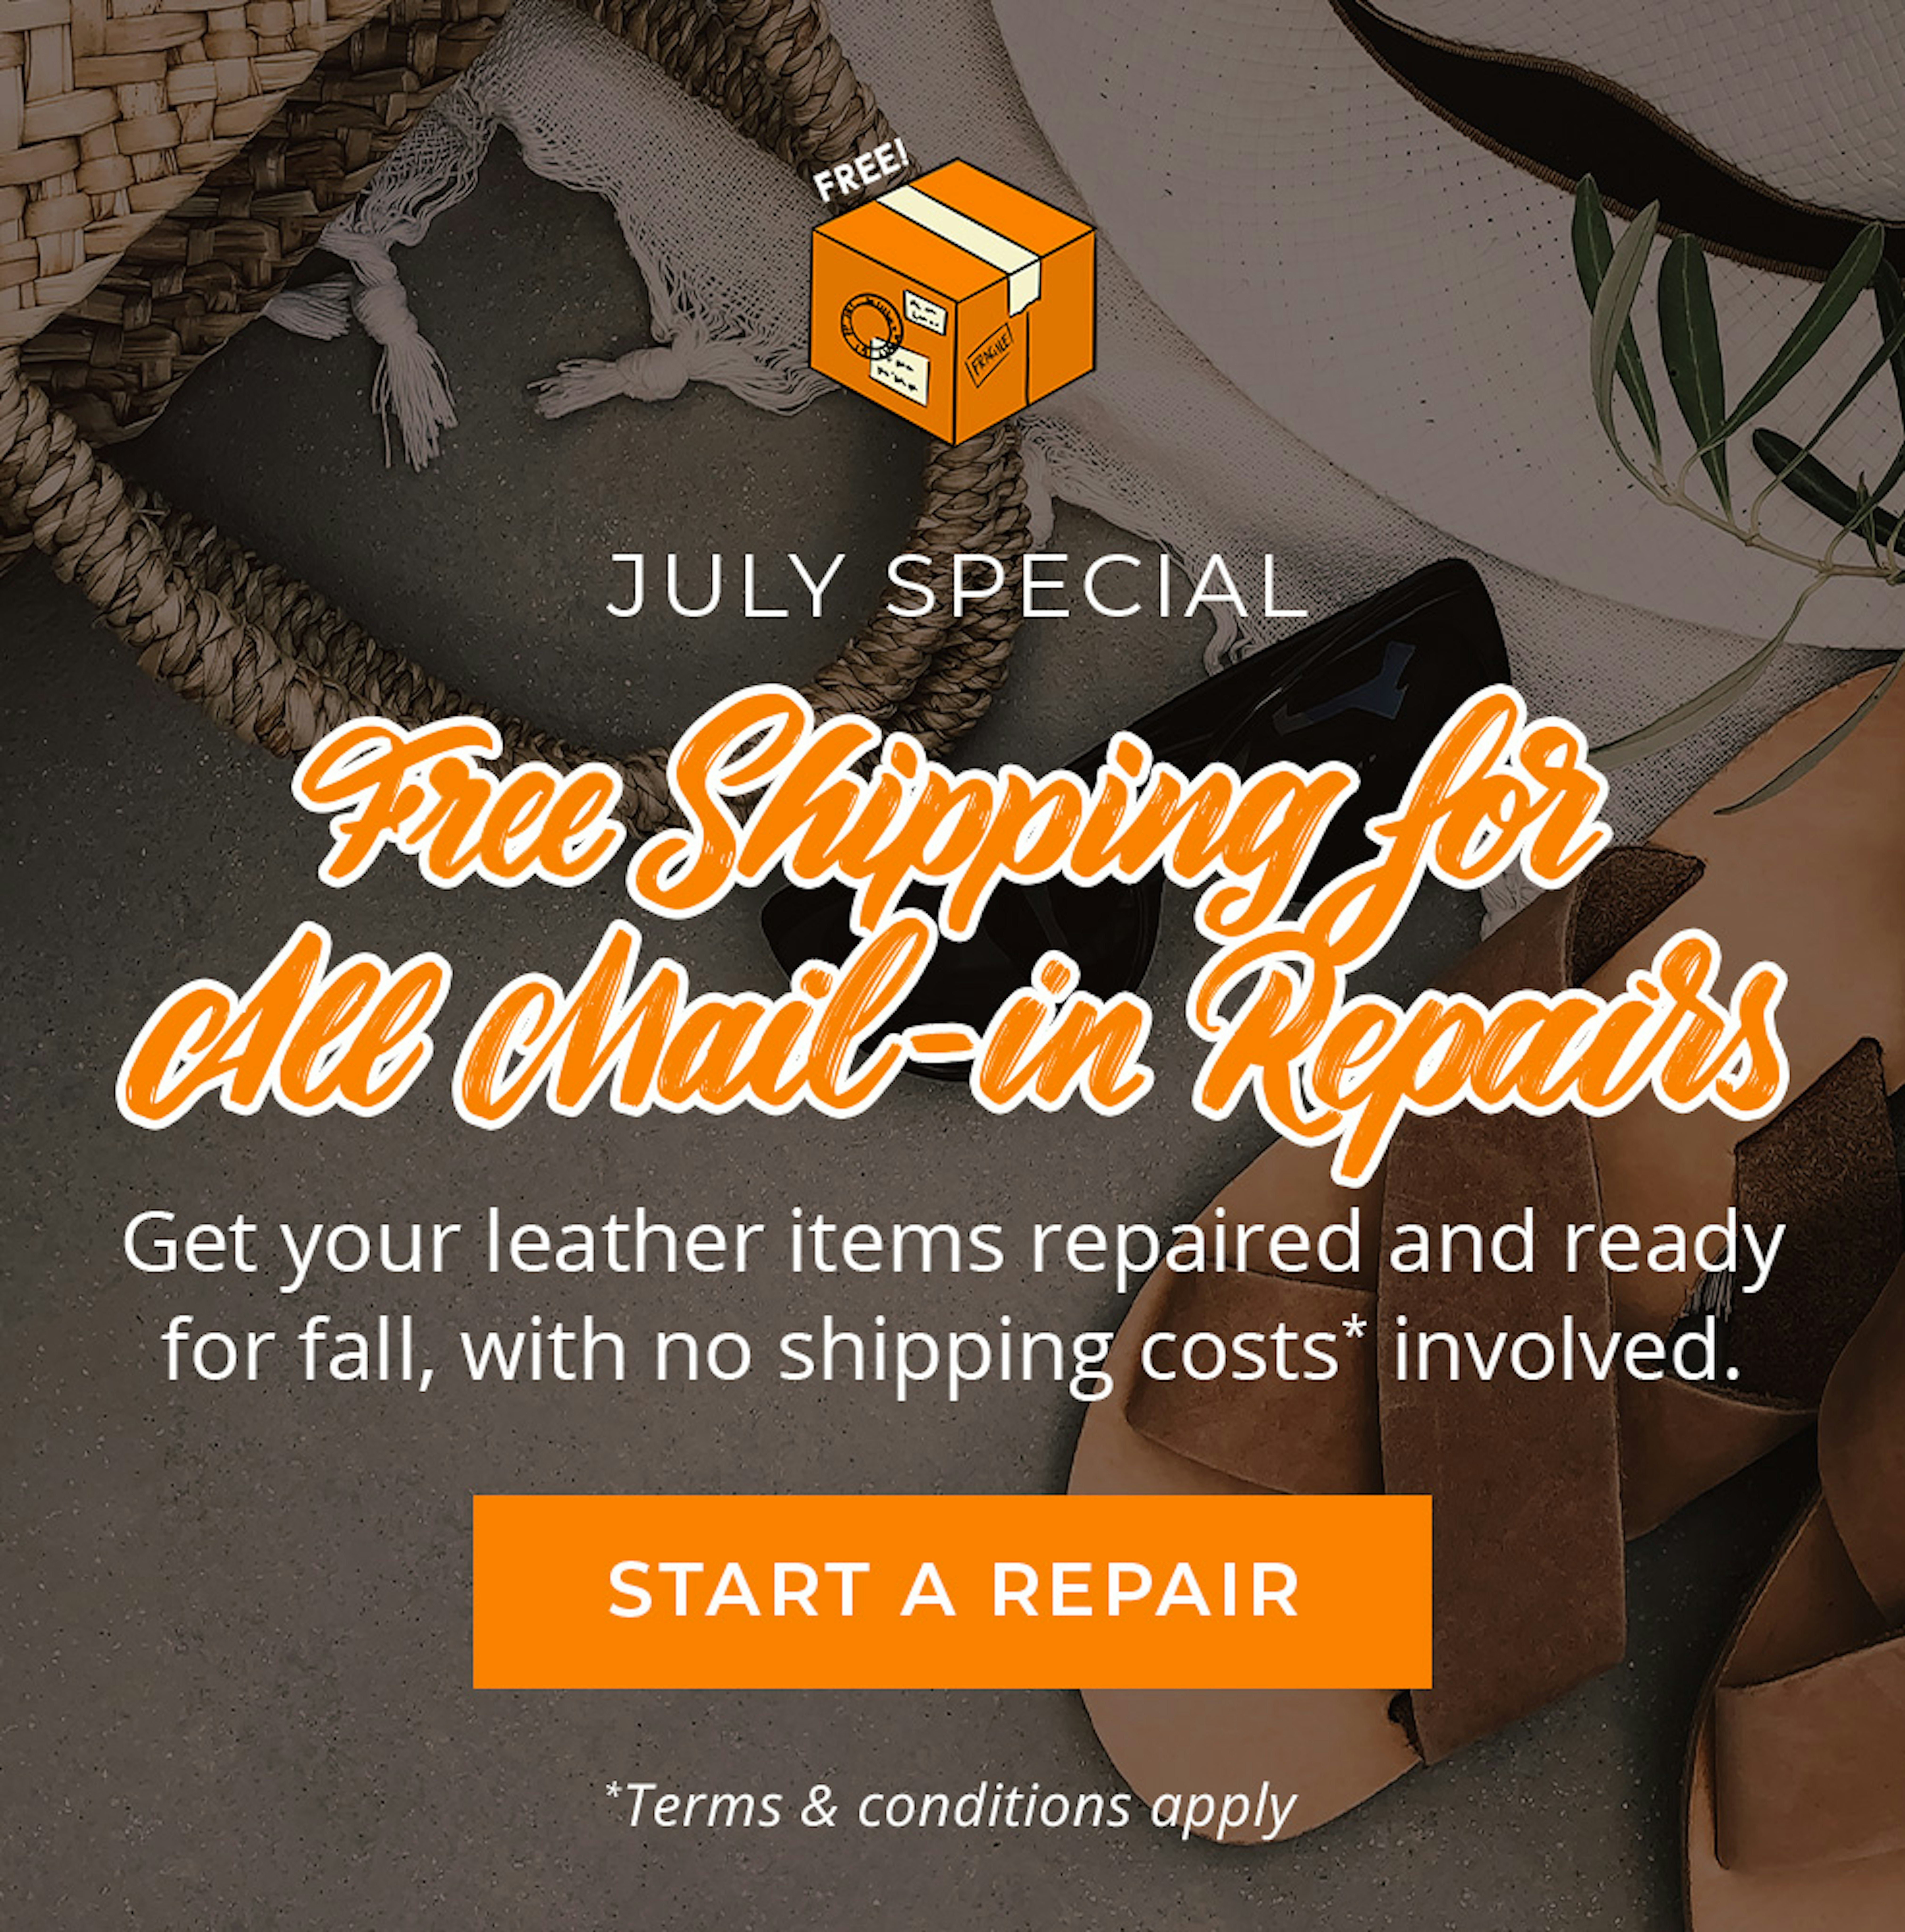 July Special. Free shipping for all mail-in repairs. Get your leather items repaired and ready for fall, with no shipping costs* involved.